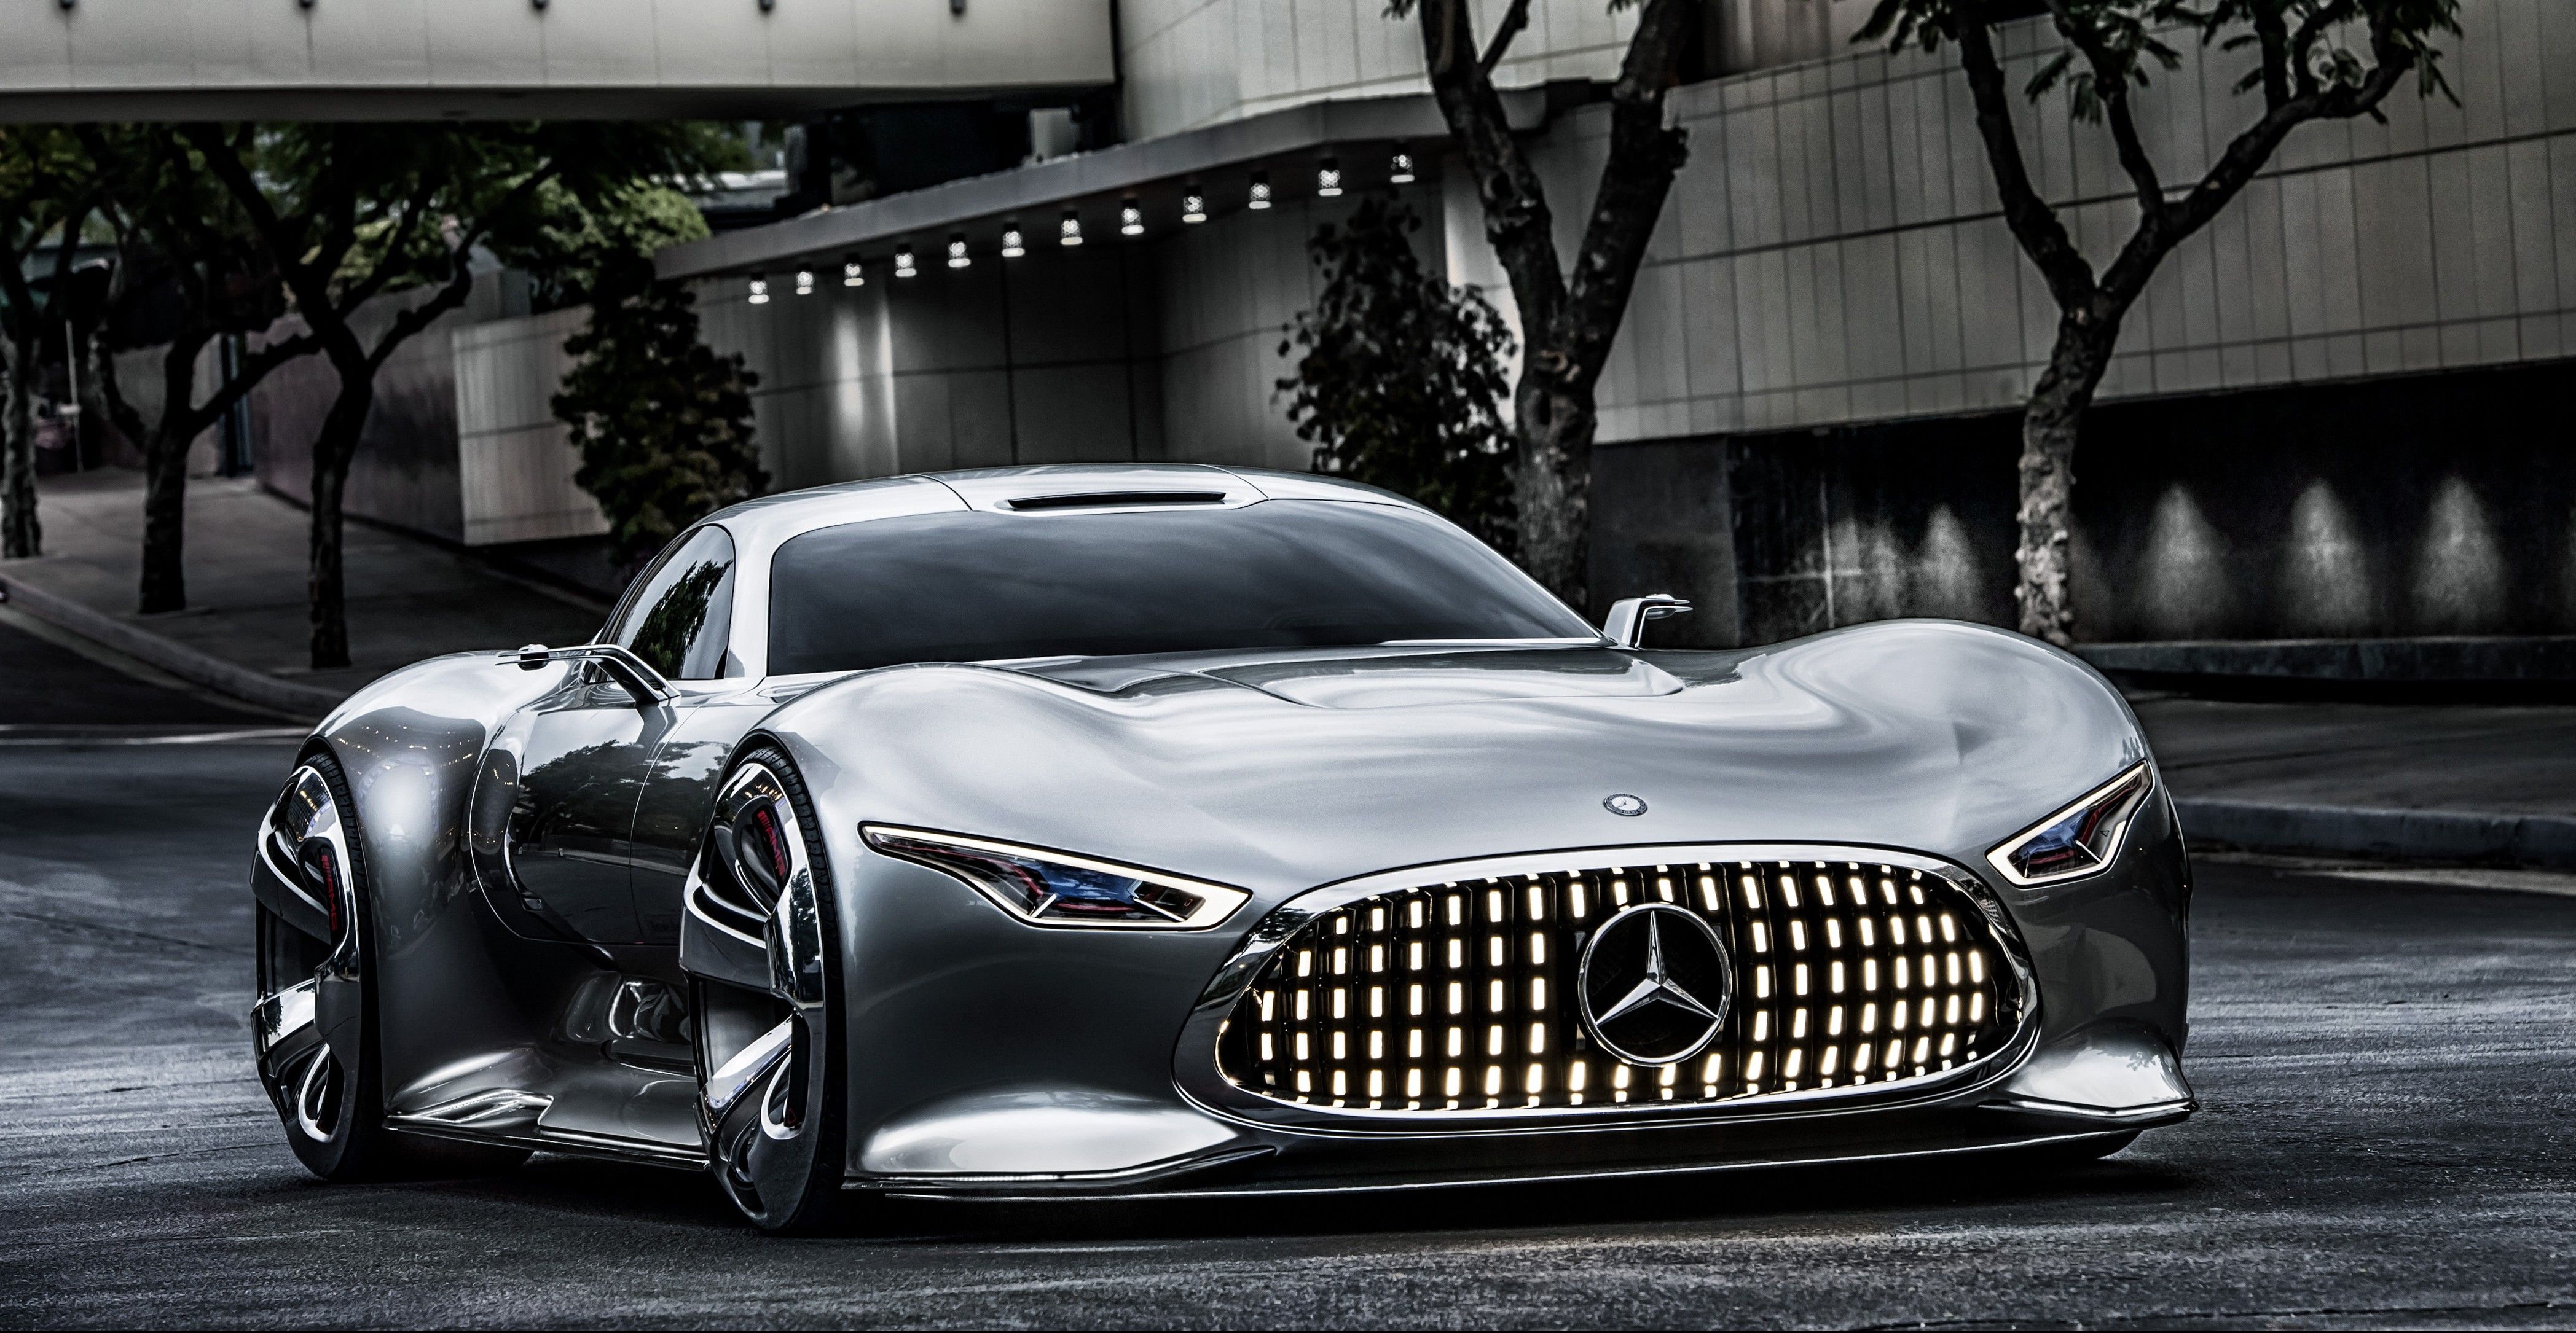 12 Of The Most Expensive Mercedes-Benz Cars Ever Sold